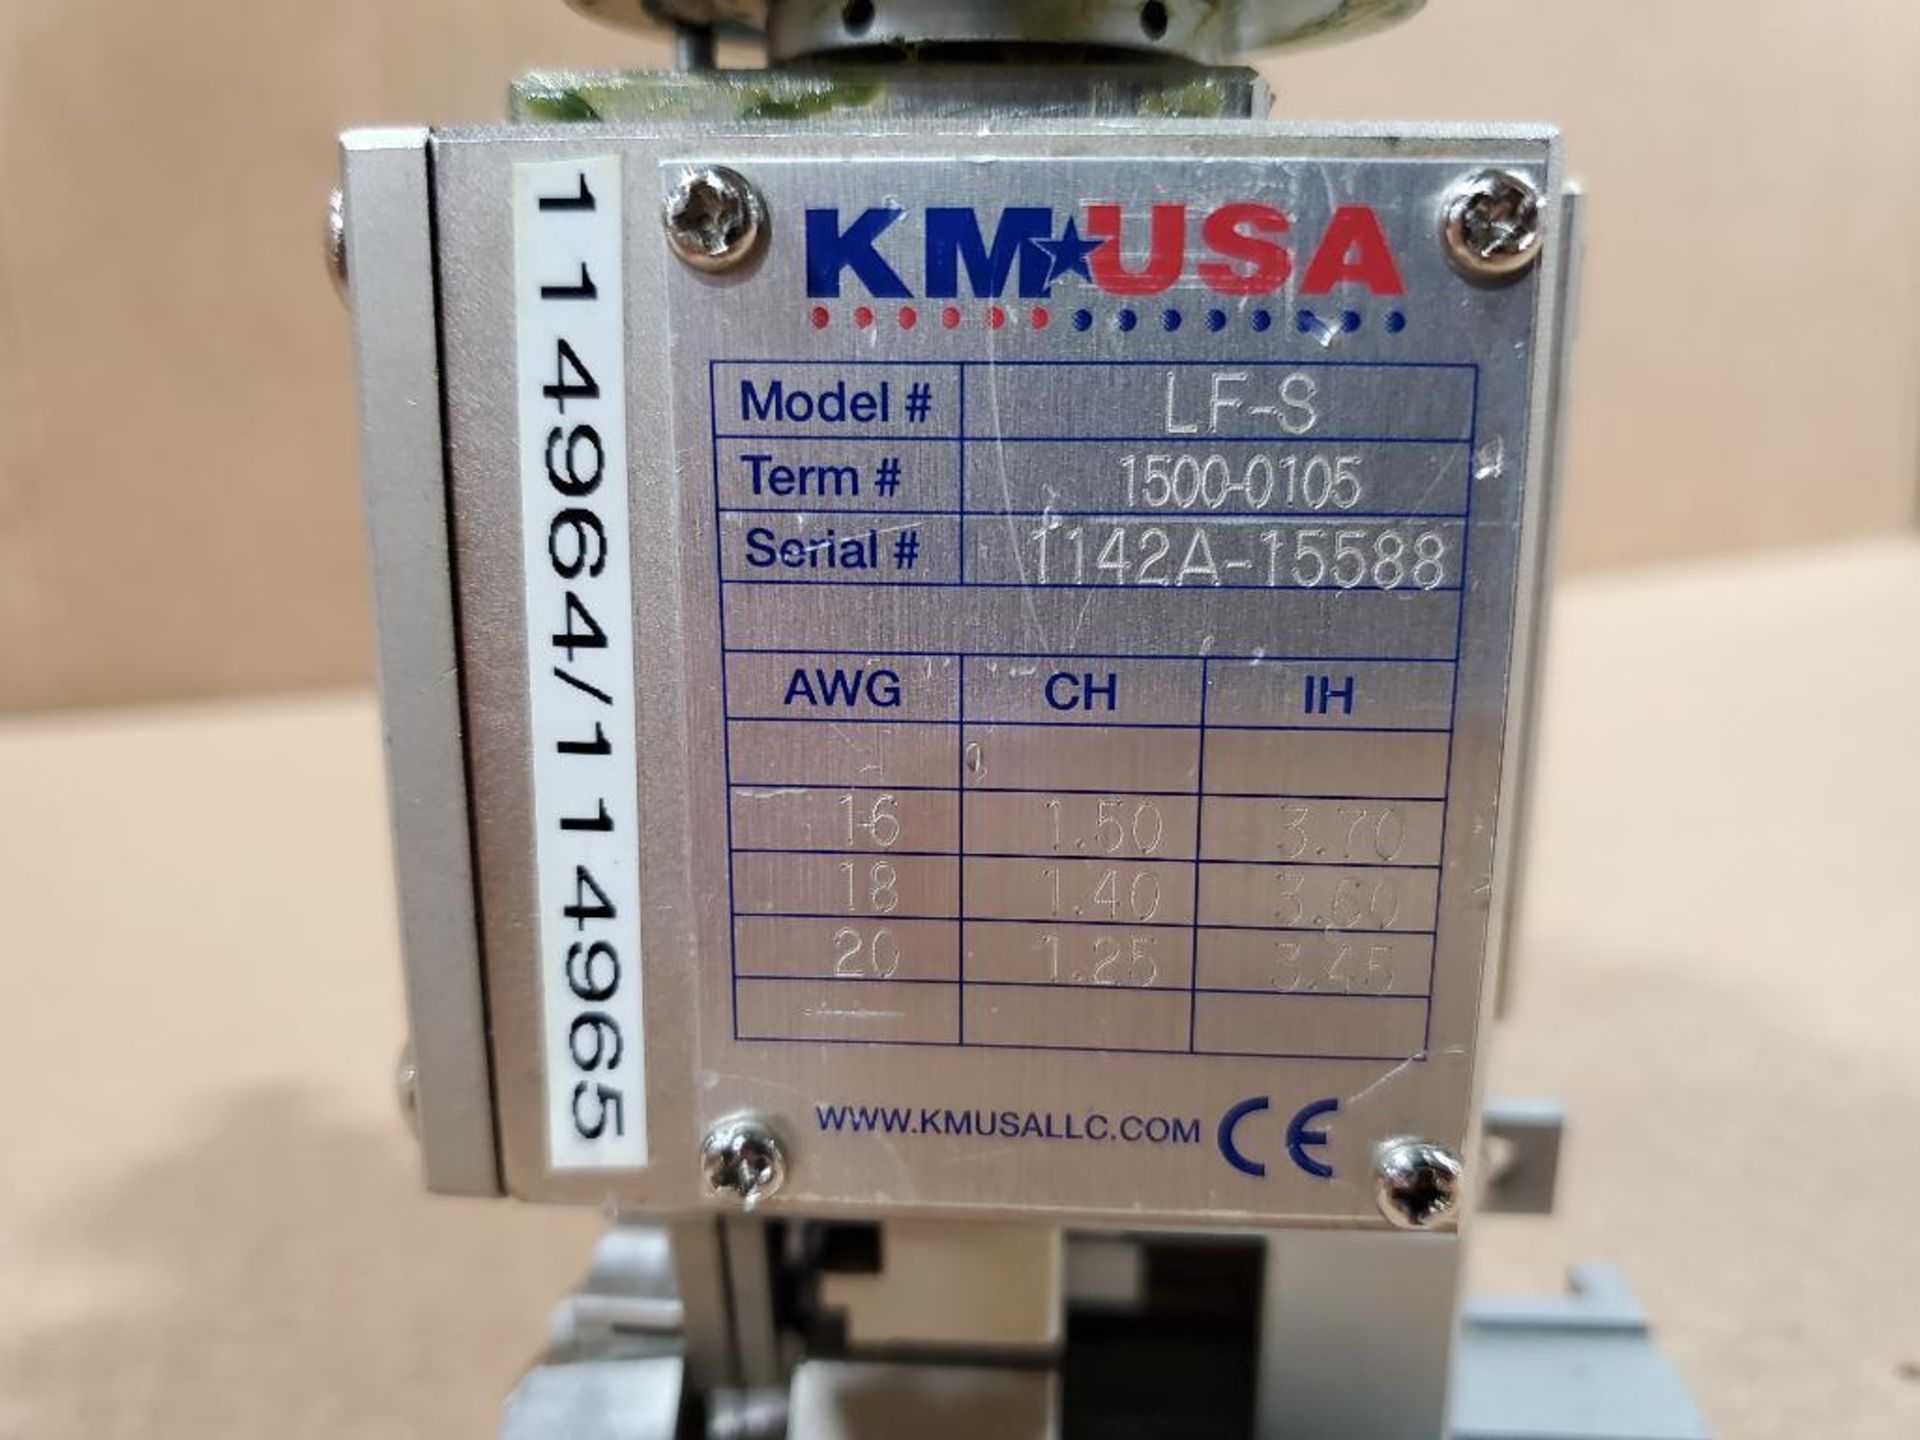 KM USA wire terminal applicator. Number LF-S. - Image 3 of 4